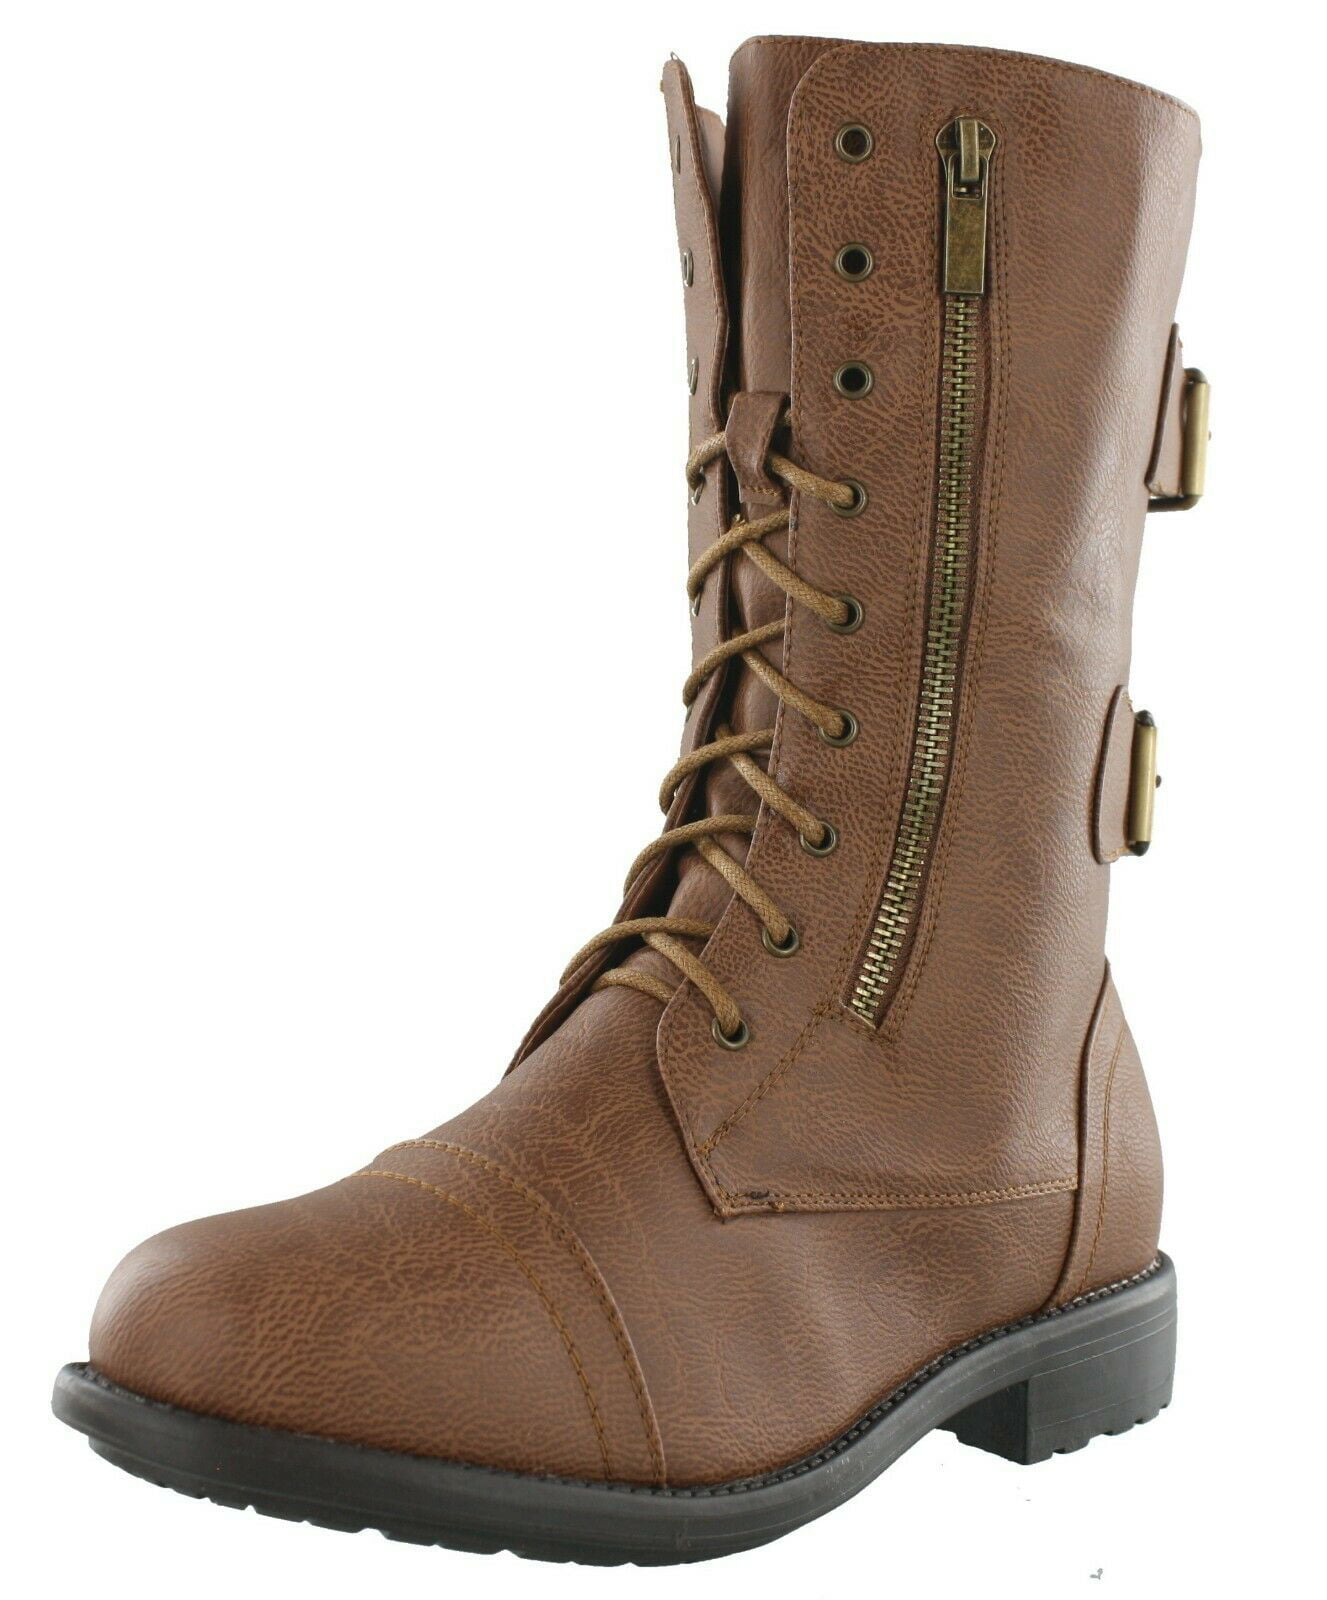 Top Moda COCO-7 Womens Mid Calf Military Lace Up Combat Boots Color:TAN Size:7.5